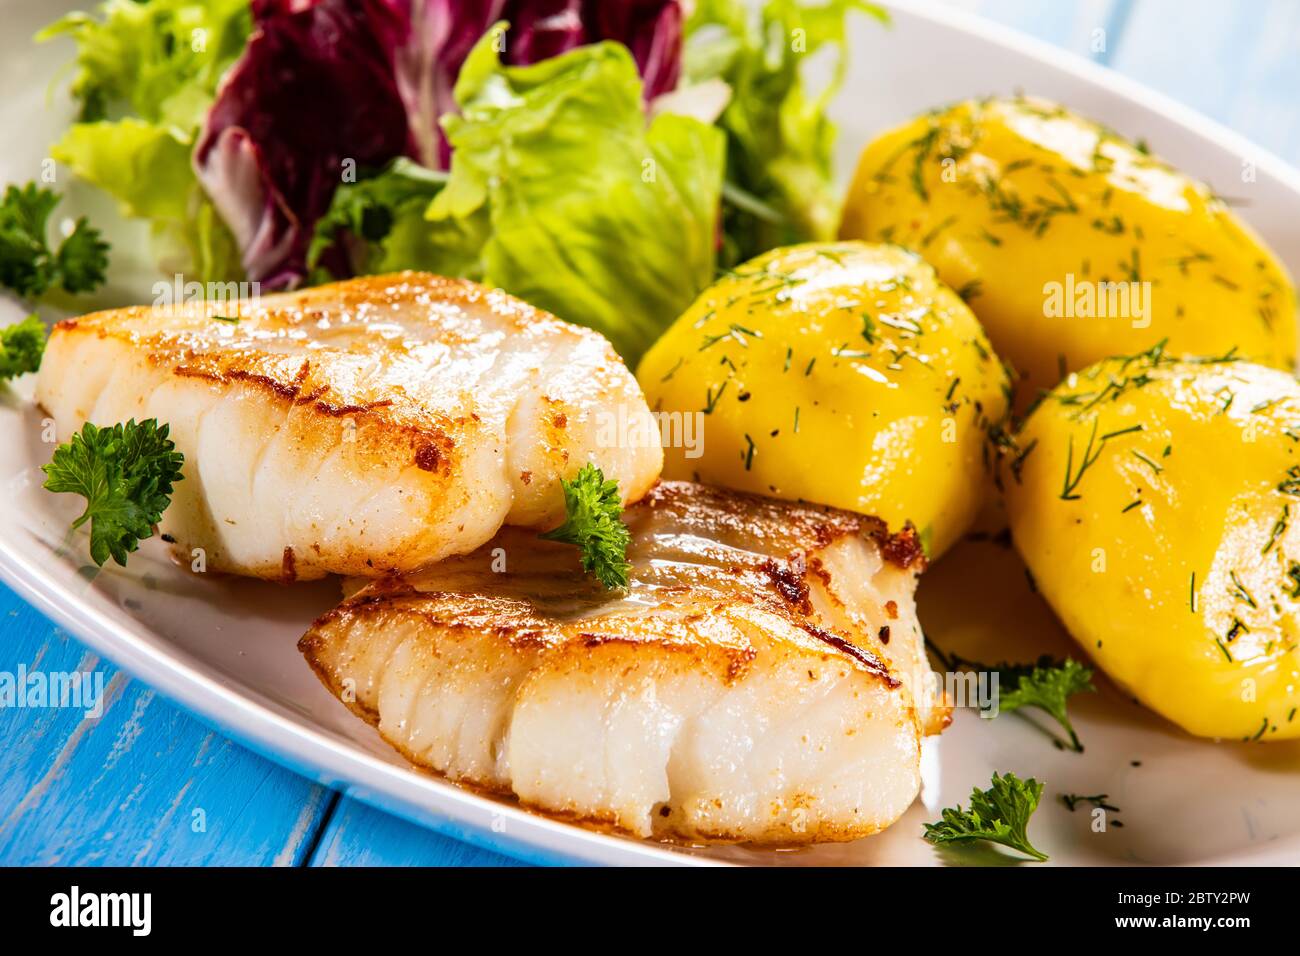 Fried fish with potatoes and vegetable salad on wooden table Stock Photo